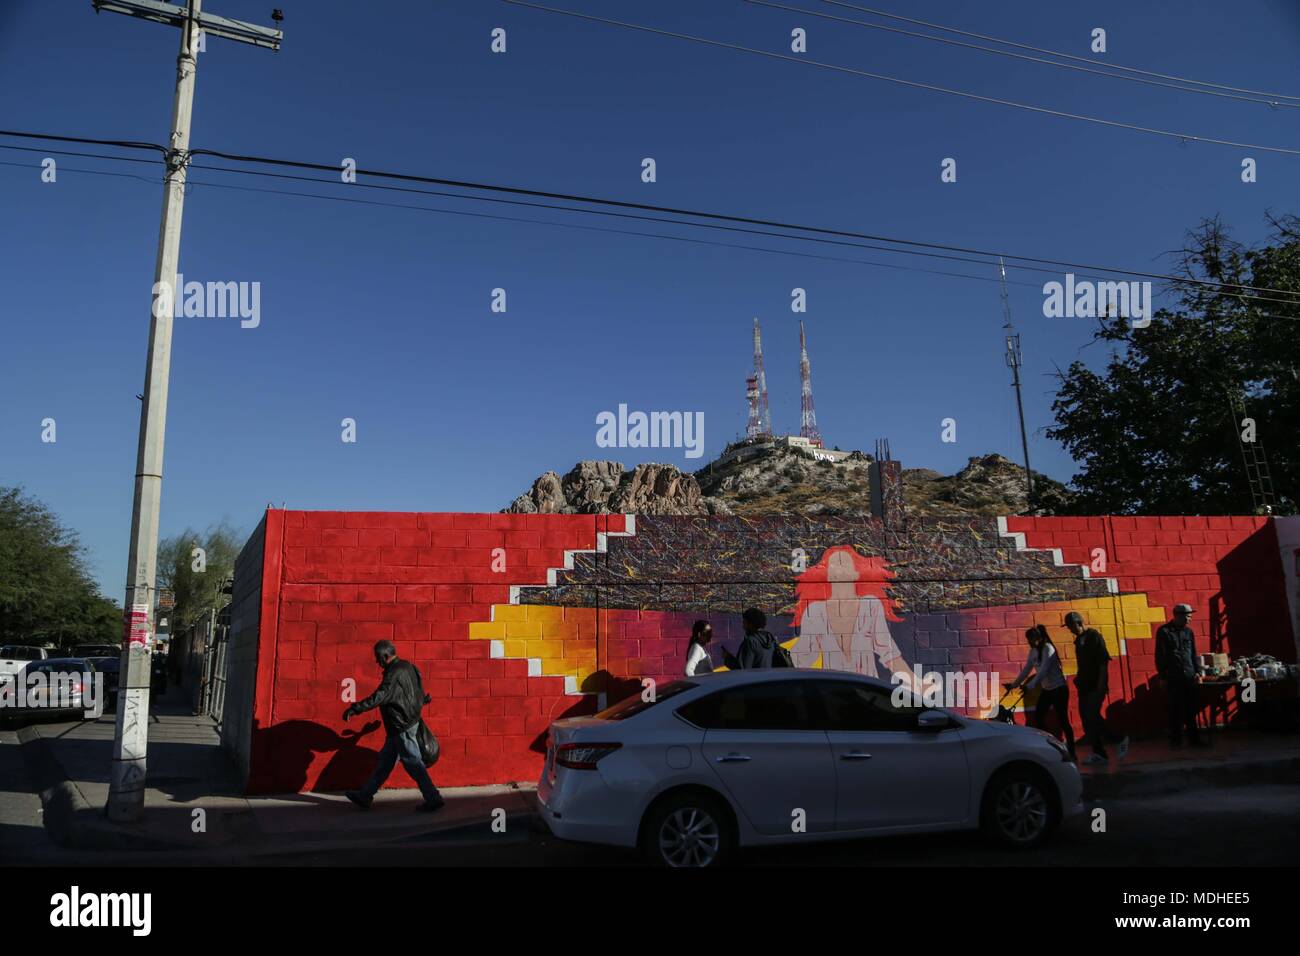 Rene Linares, painter originally from Guadalajara, paints mural in the Historic Center of Hermosillo, as part of the artistic projects of Casa Madrid. Stock Photo